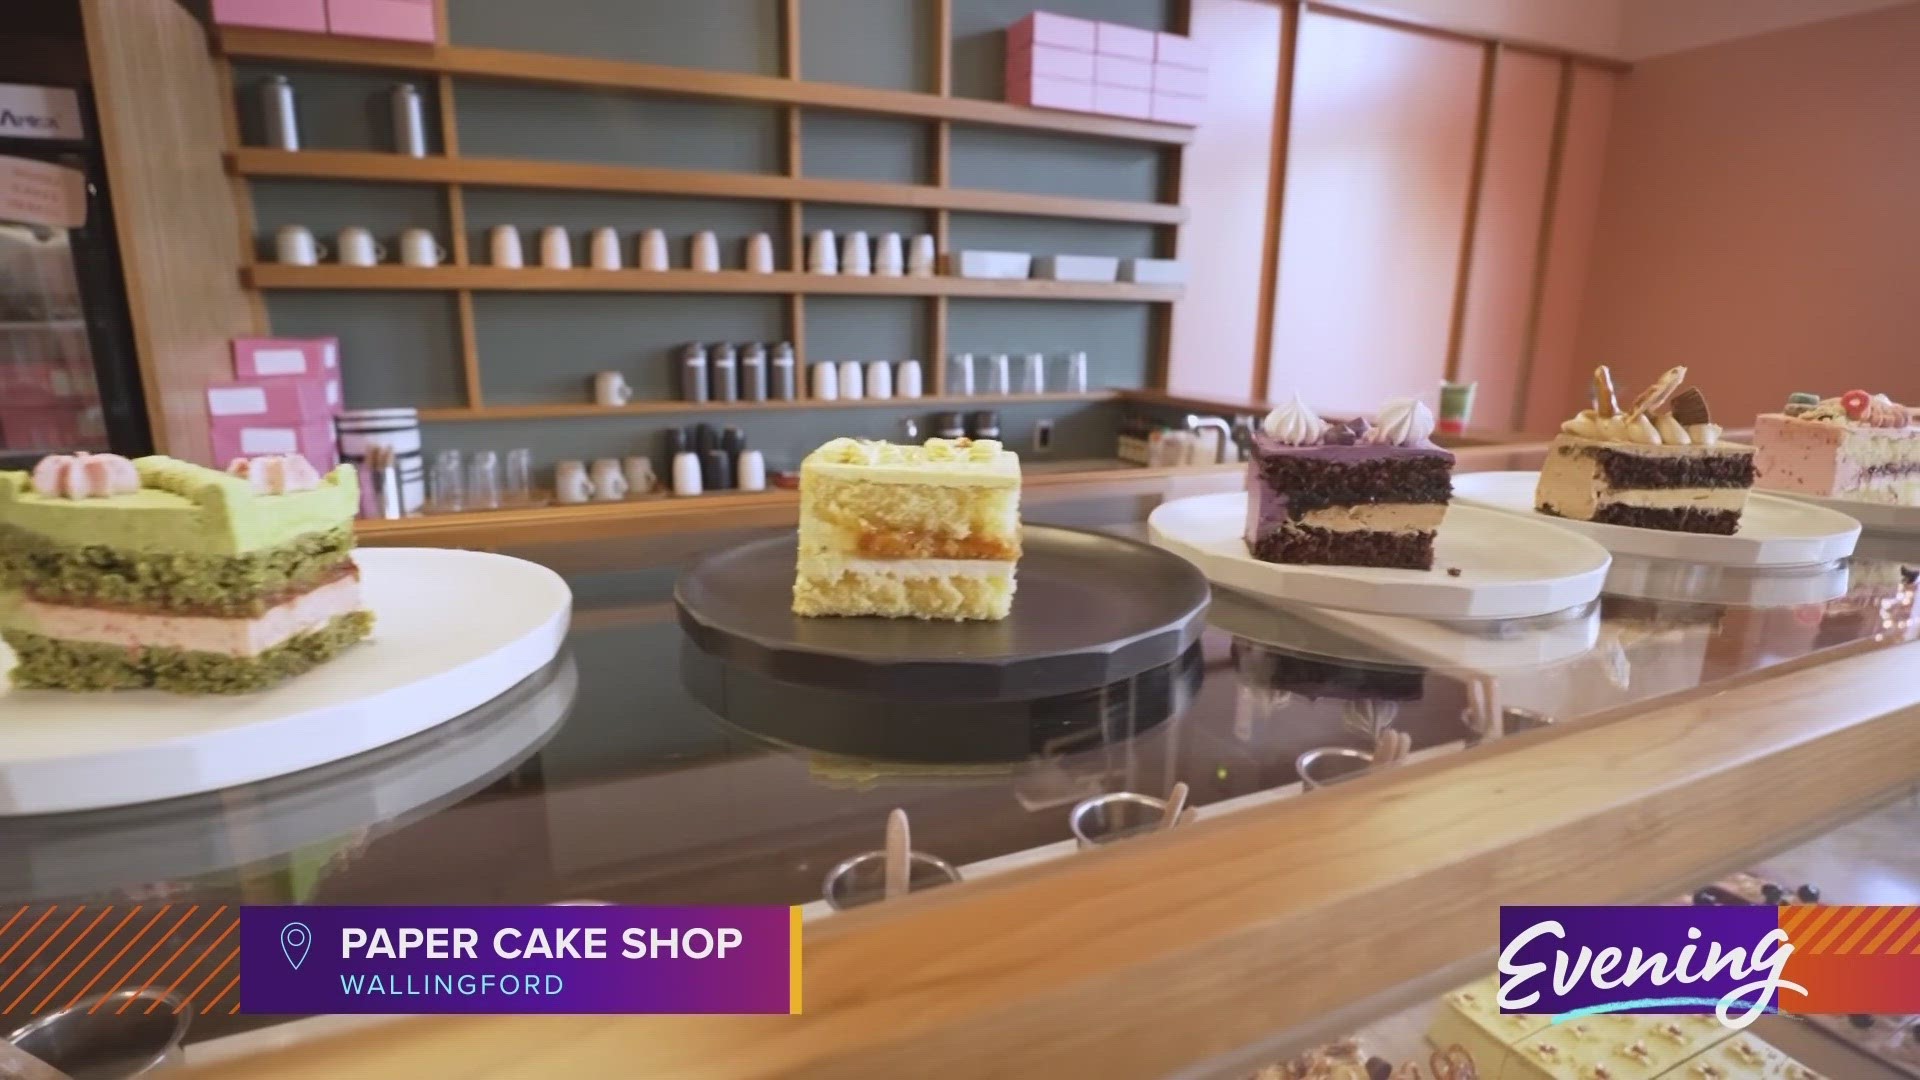 Paper Cake Shop serves layered sheet cake with Asian-inspired flavors and tea lattes. #k5evening